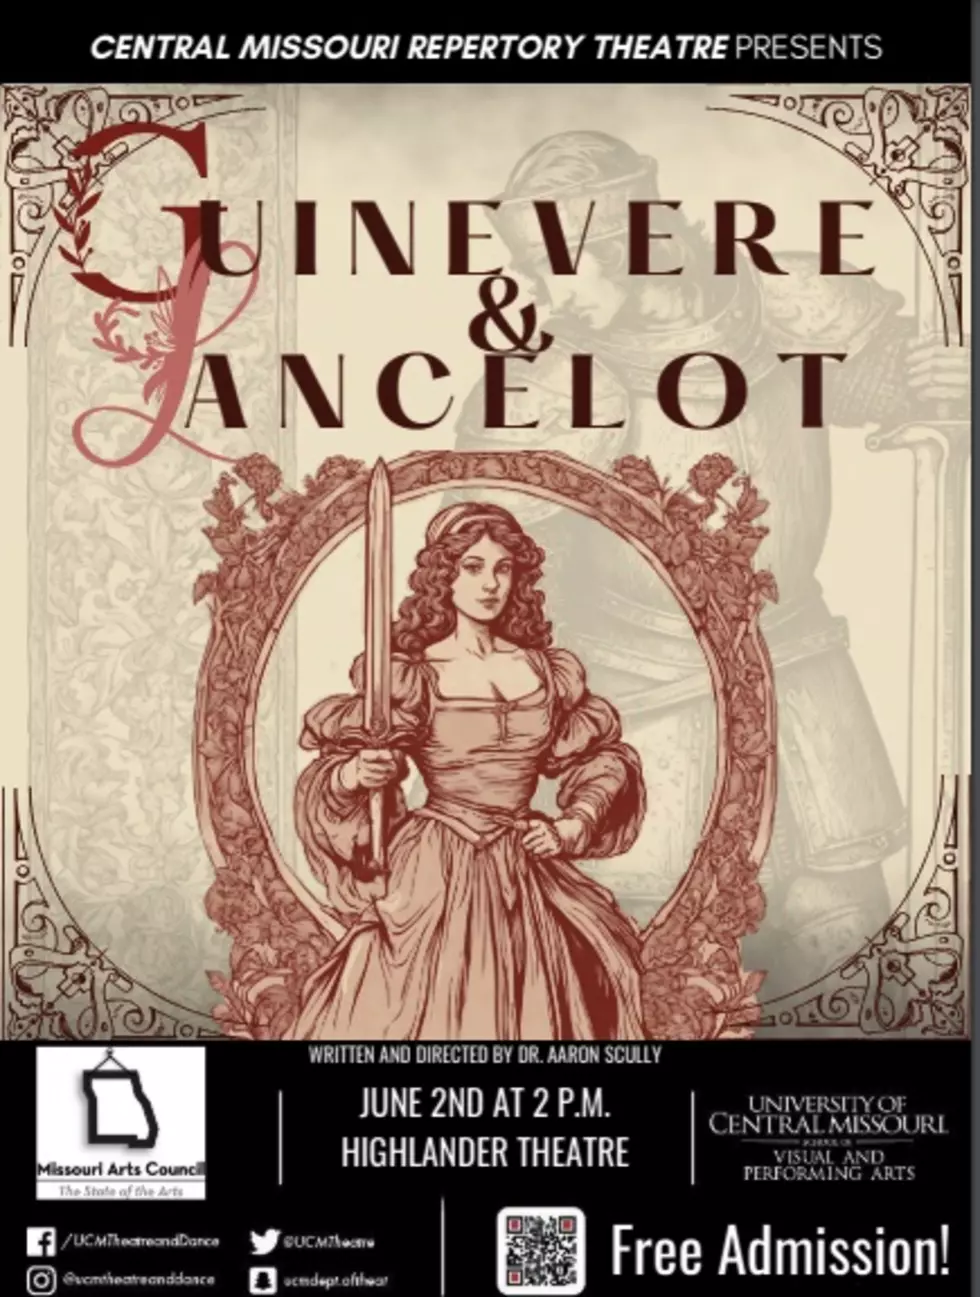 Central Missouri Repertory to Present Children’s Touring Production of ‘Guinevere & Lancelot’